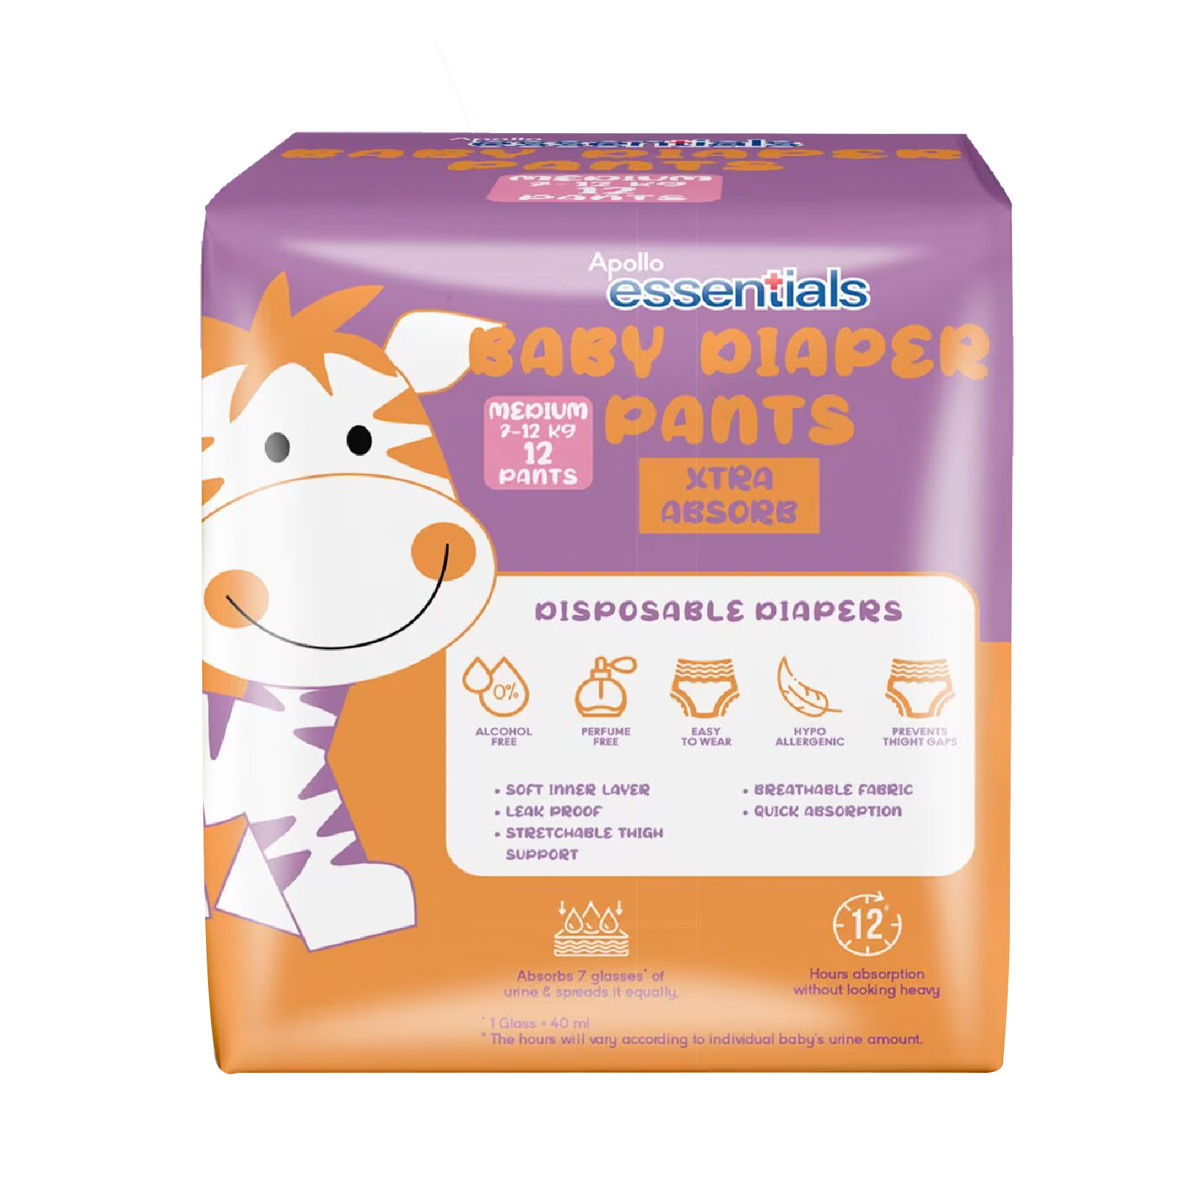 Apollo Essentials Extra Absorb Baby Diaper Pants Medium, 12 Count, Pack of 1 